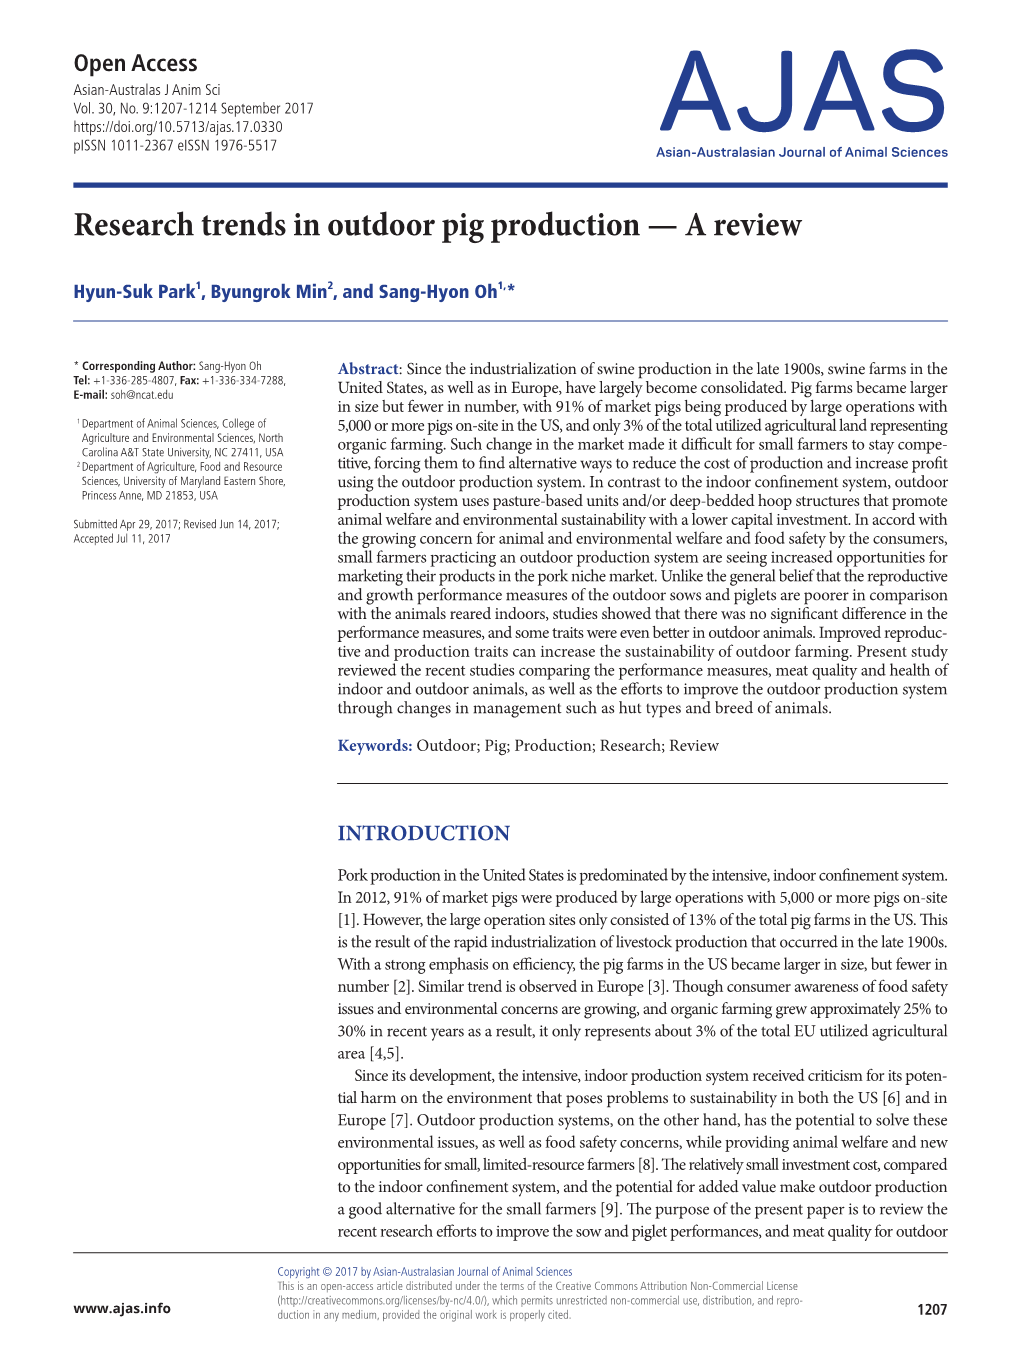 Research Trends in Outdoor Pig Production — a Review